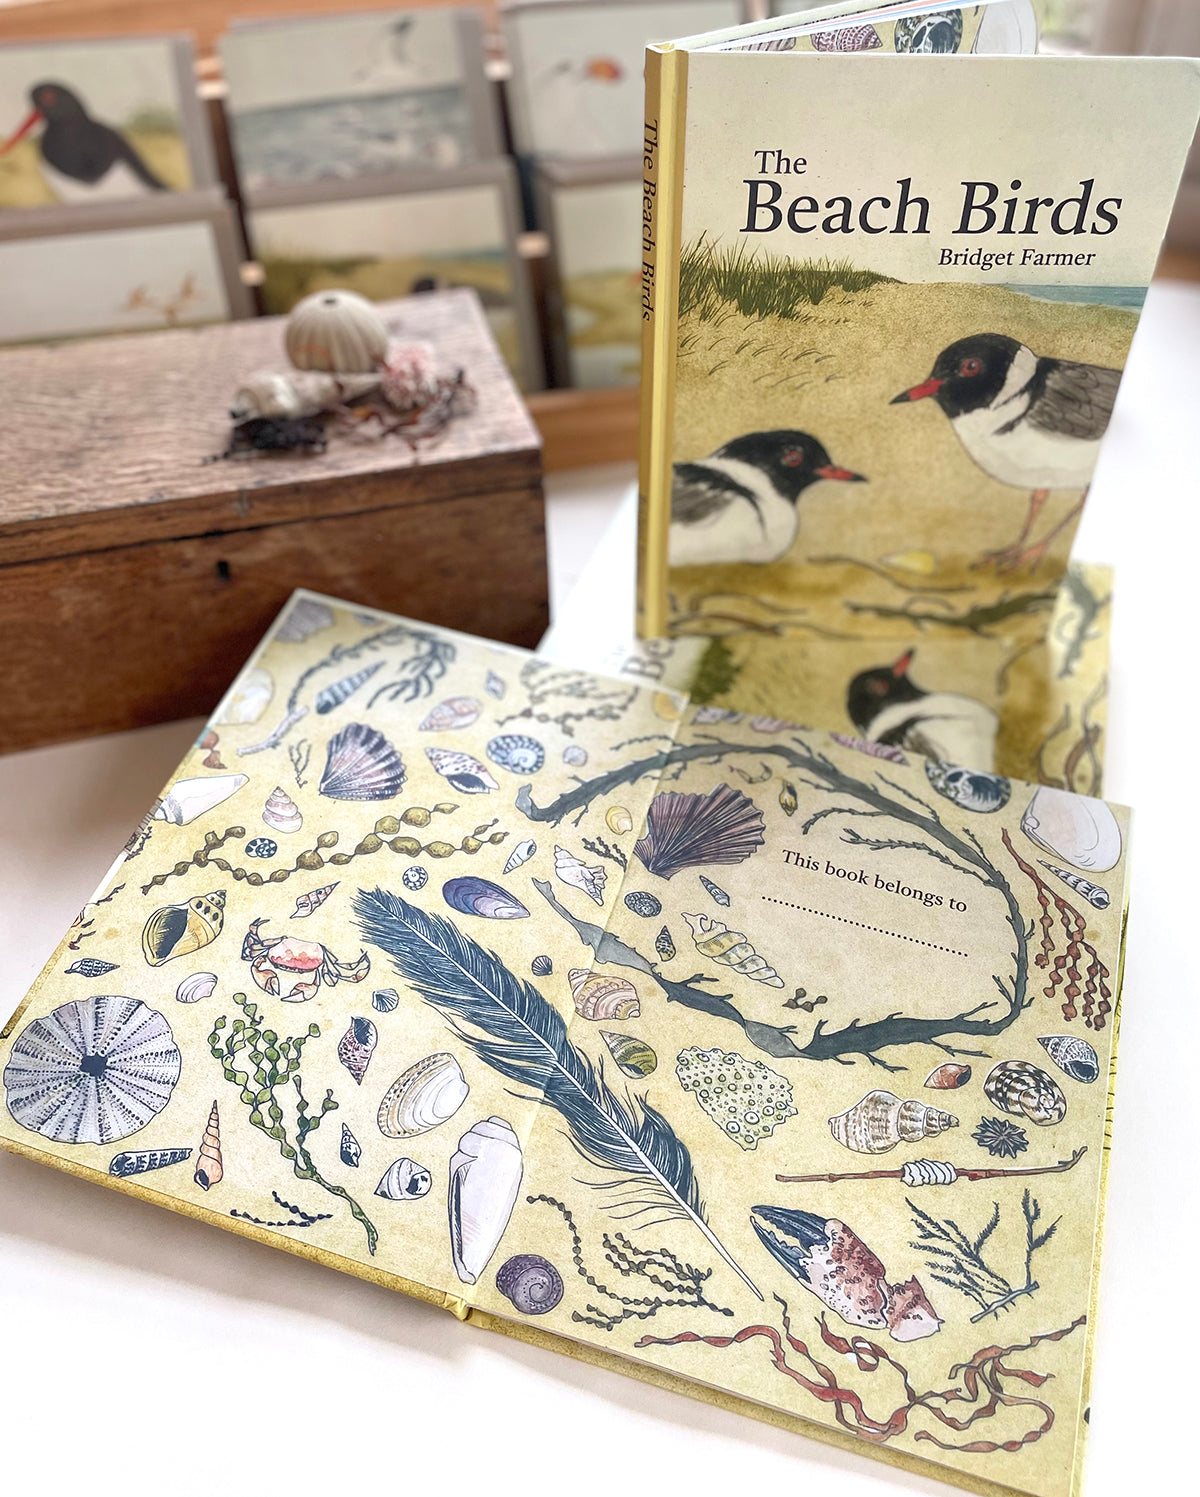 Book and Game Combo Deal - THE BEACH BIRDS